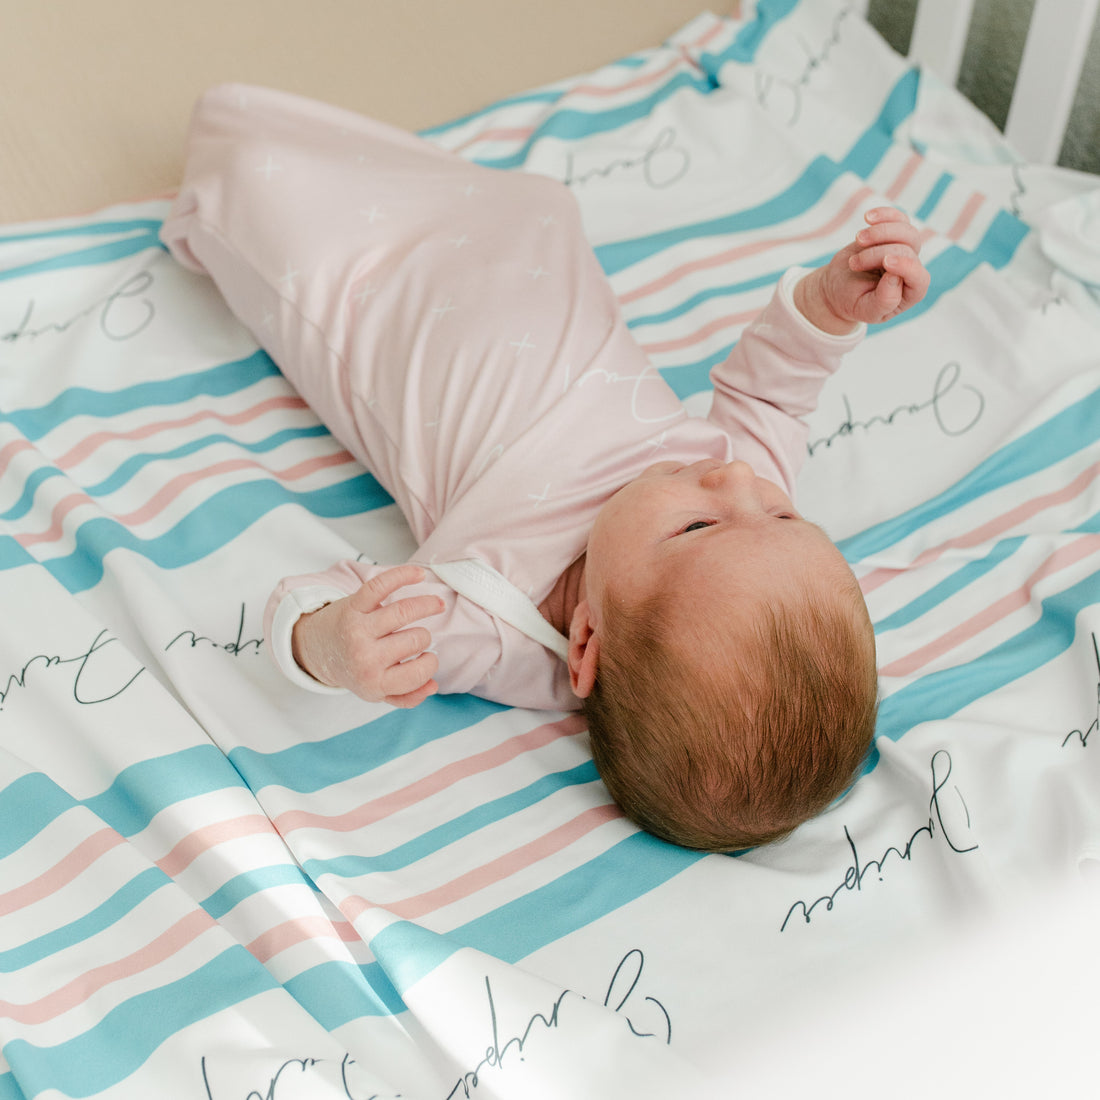 X Marks the Spot Knotted Baby Gown (Pink or Blue)